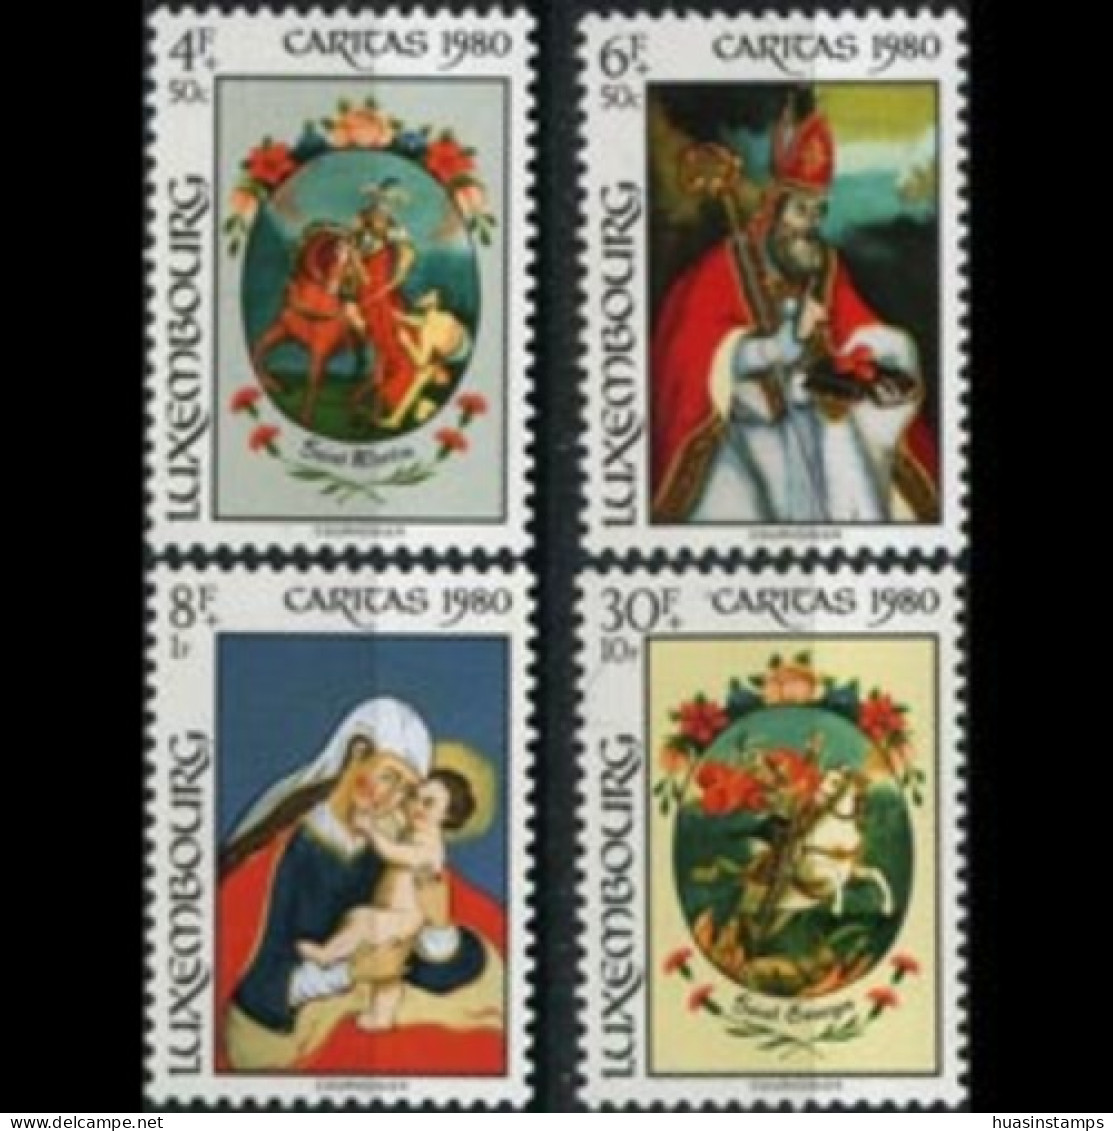 LUXEMBOURG 1980 - Scott# B328-31 Paintings Set Of 4 MNH - Unused Stamps